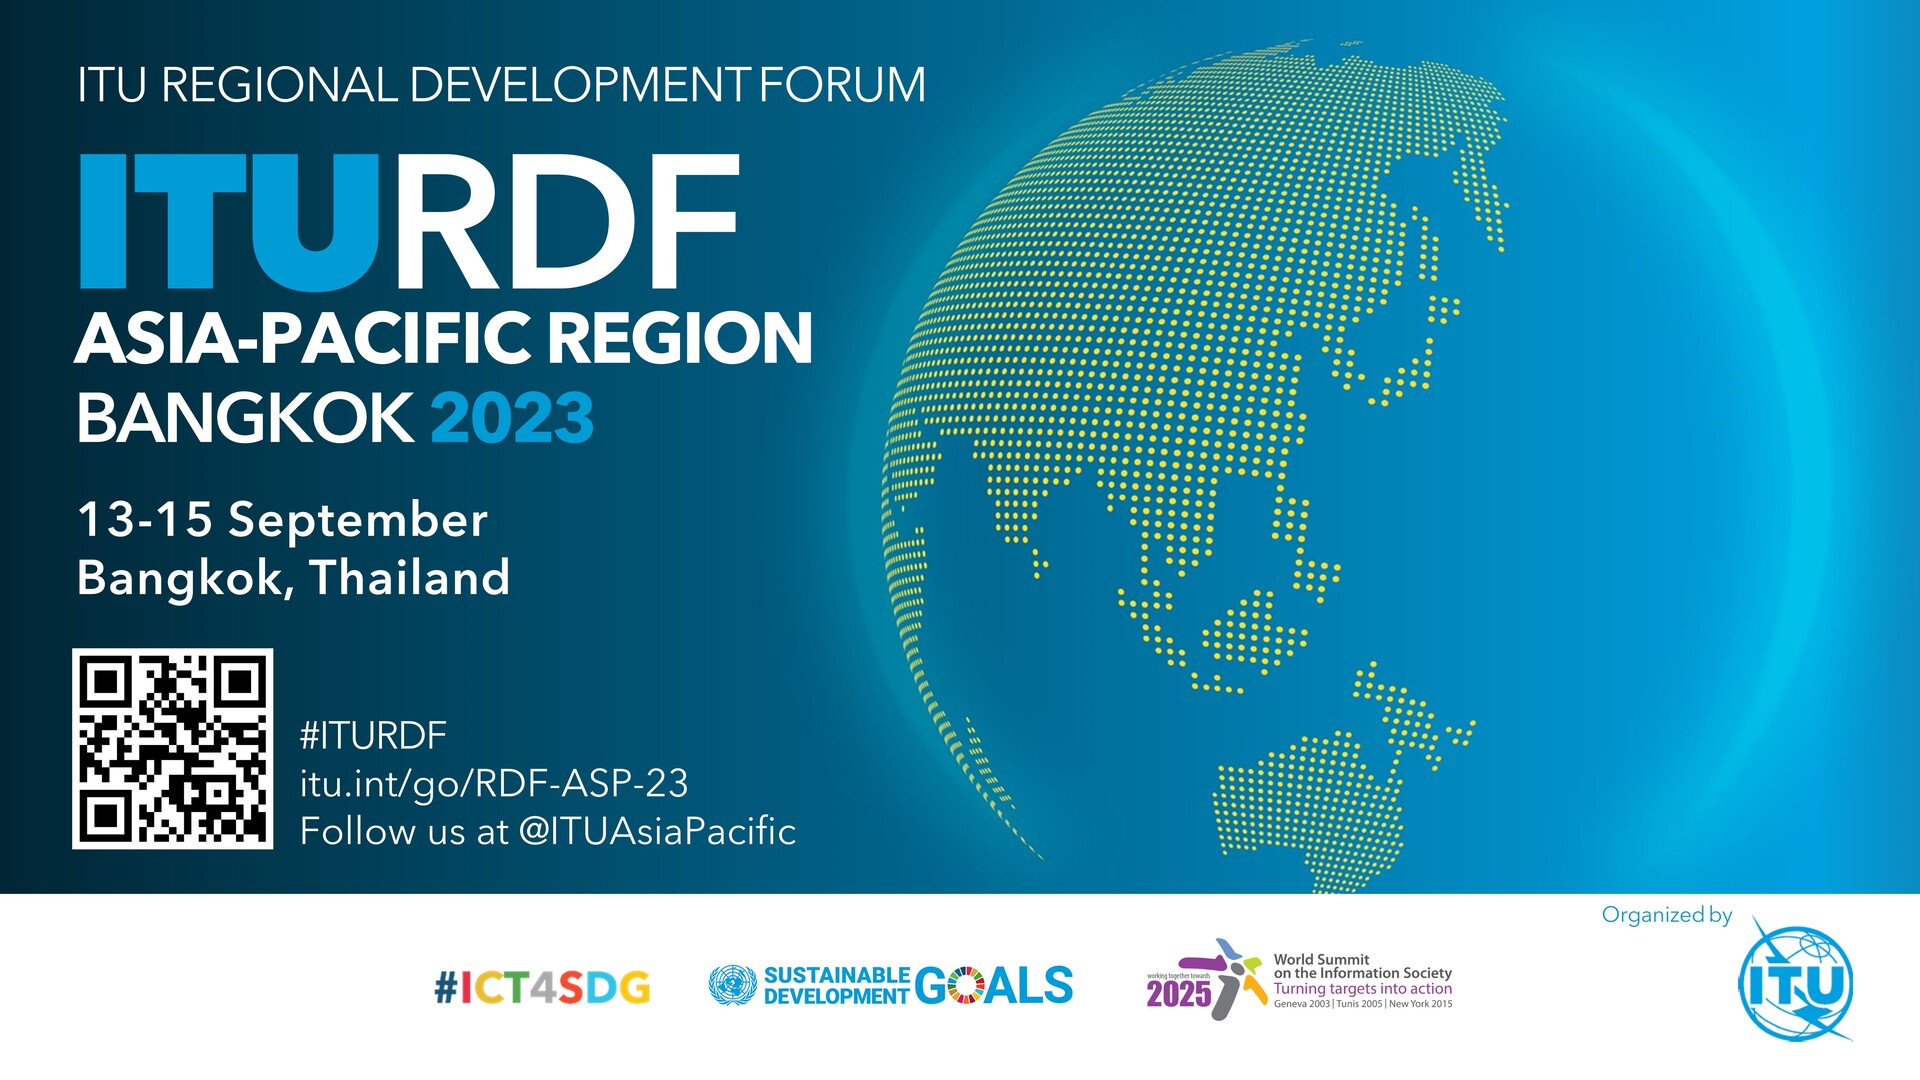 ITU Regional Development Forum for Asia and the Pacific